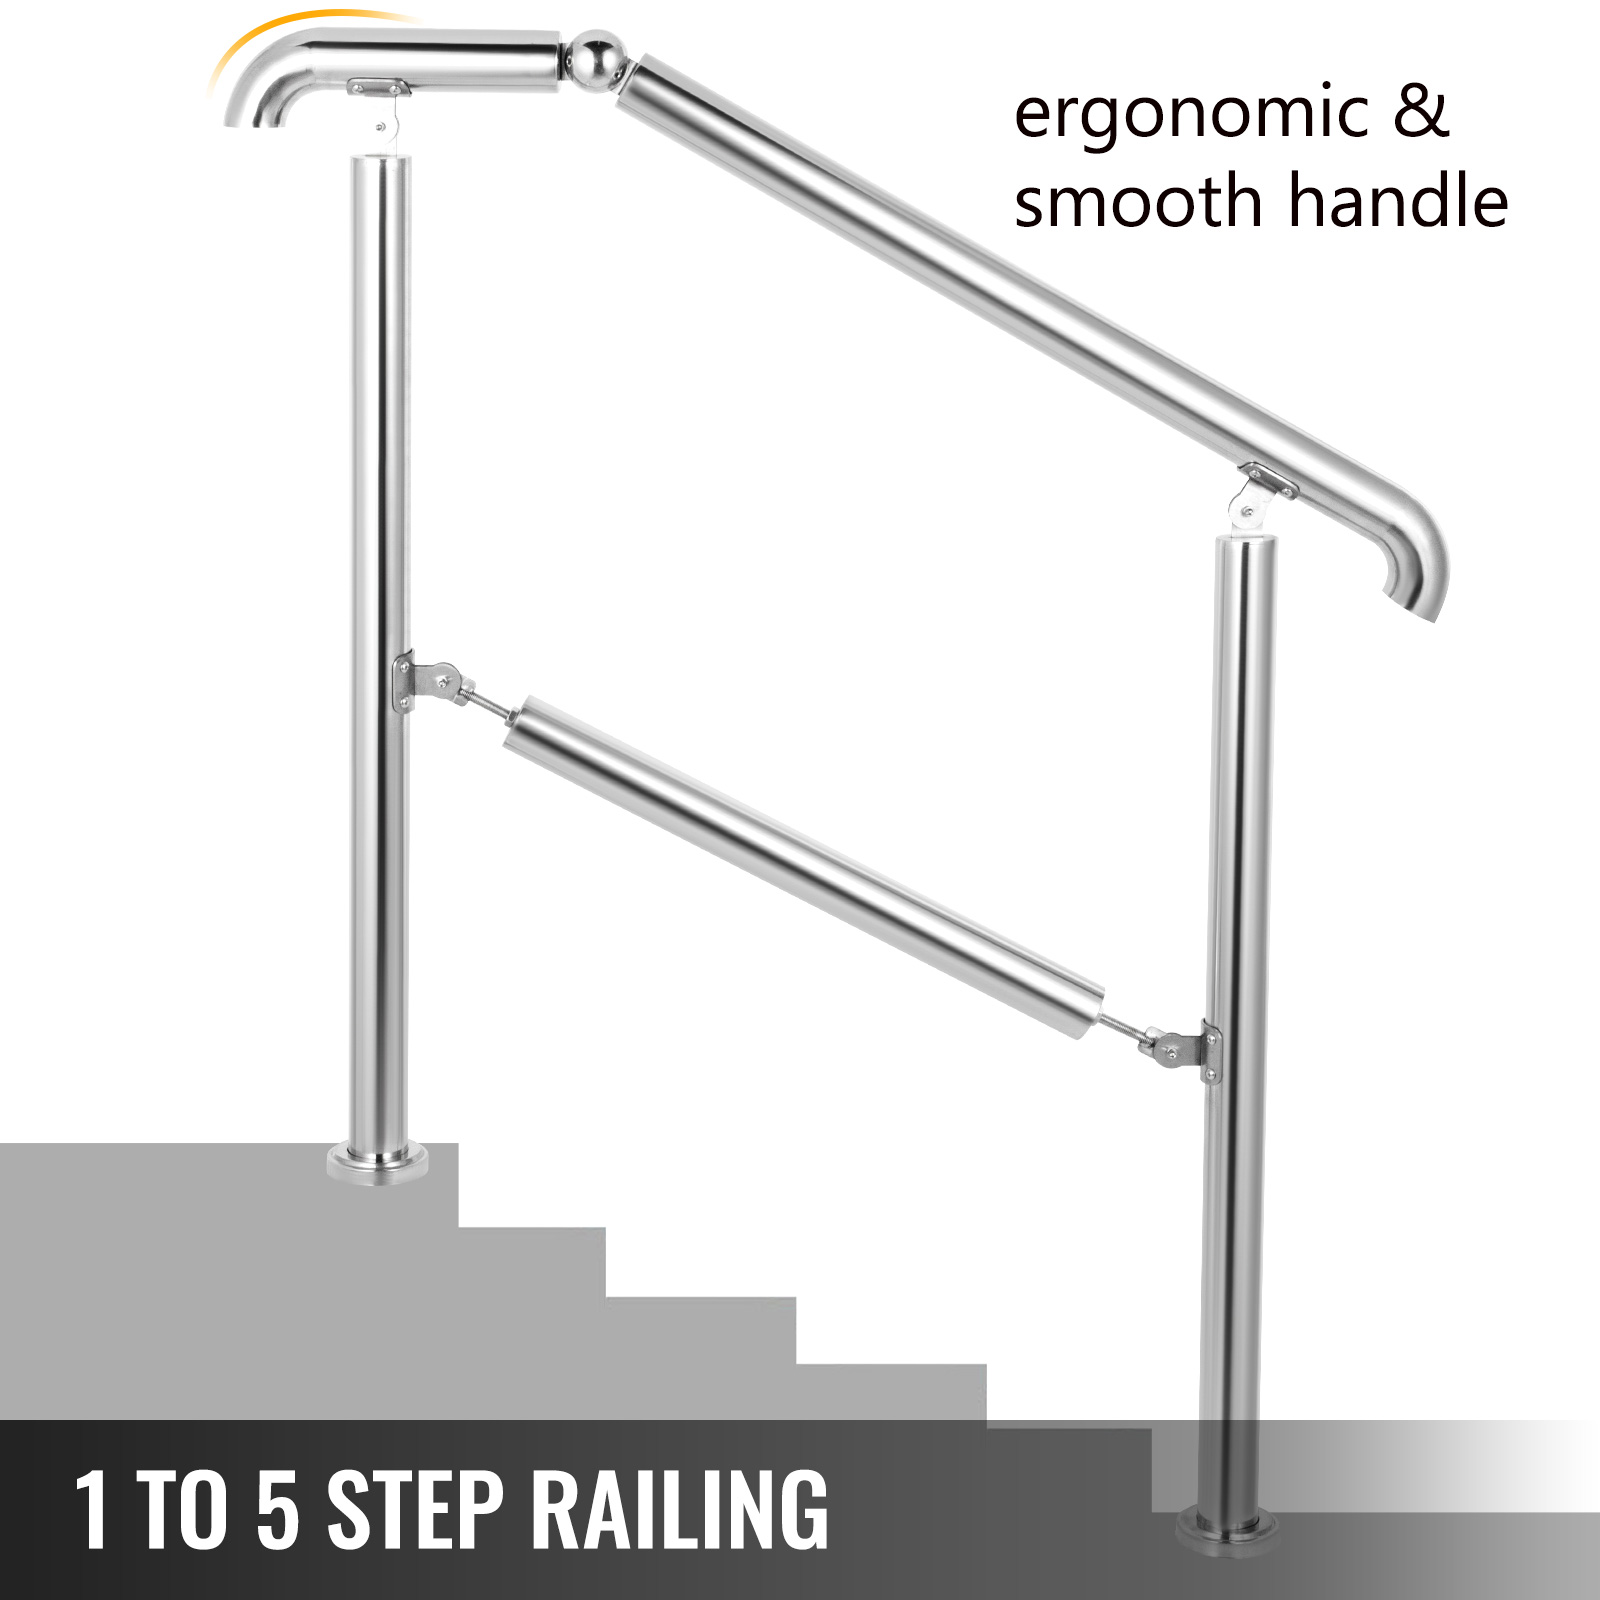 VEVOR Stainless Steel Handrail 220LBS Load Handrail for Outdoor Steps 47x34 Outdoor Stair Railing Silver Stair Handrail Transitional Range from 60 to 130/° Stair Rail Fits 3-4 Steps with Screw Kit